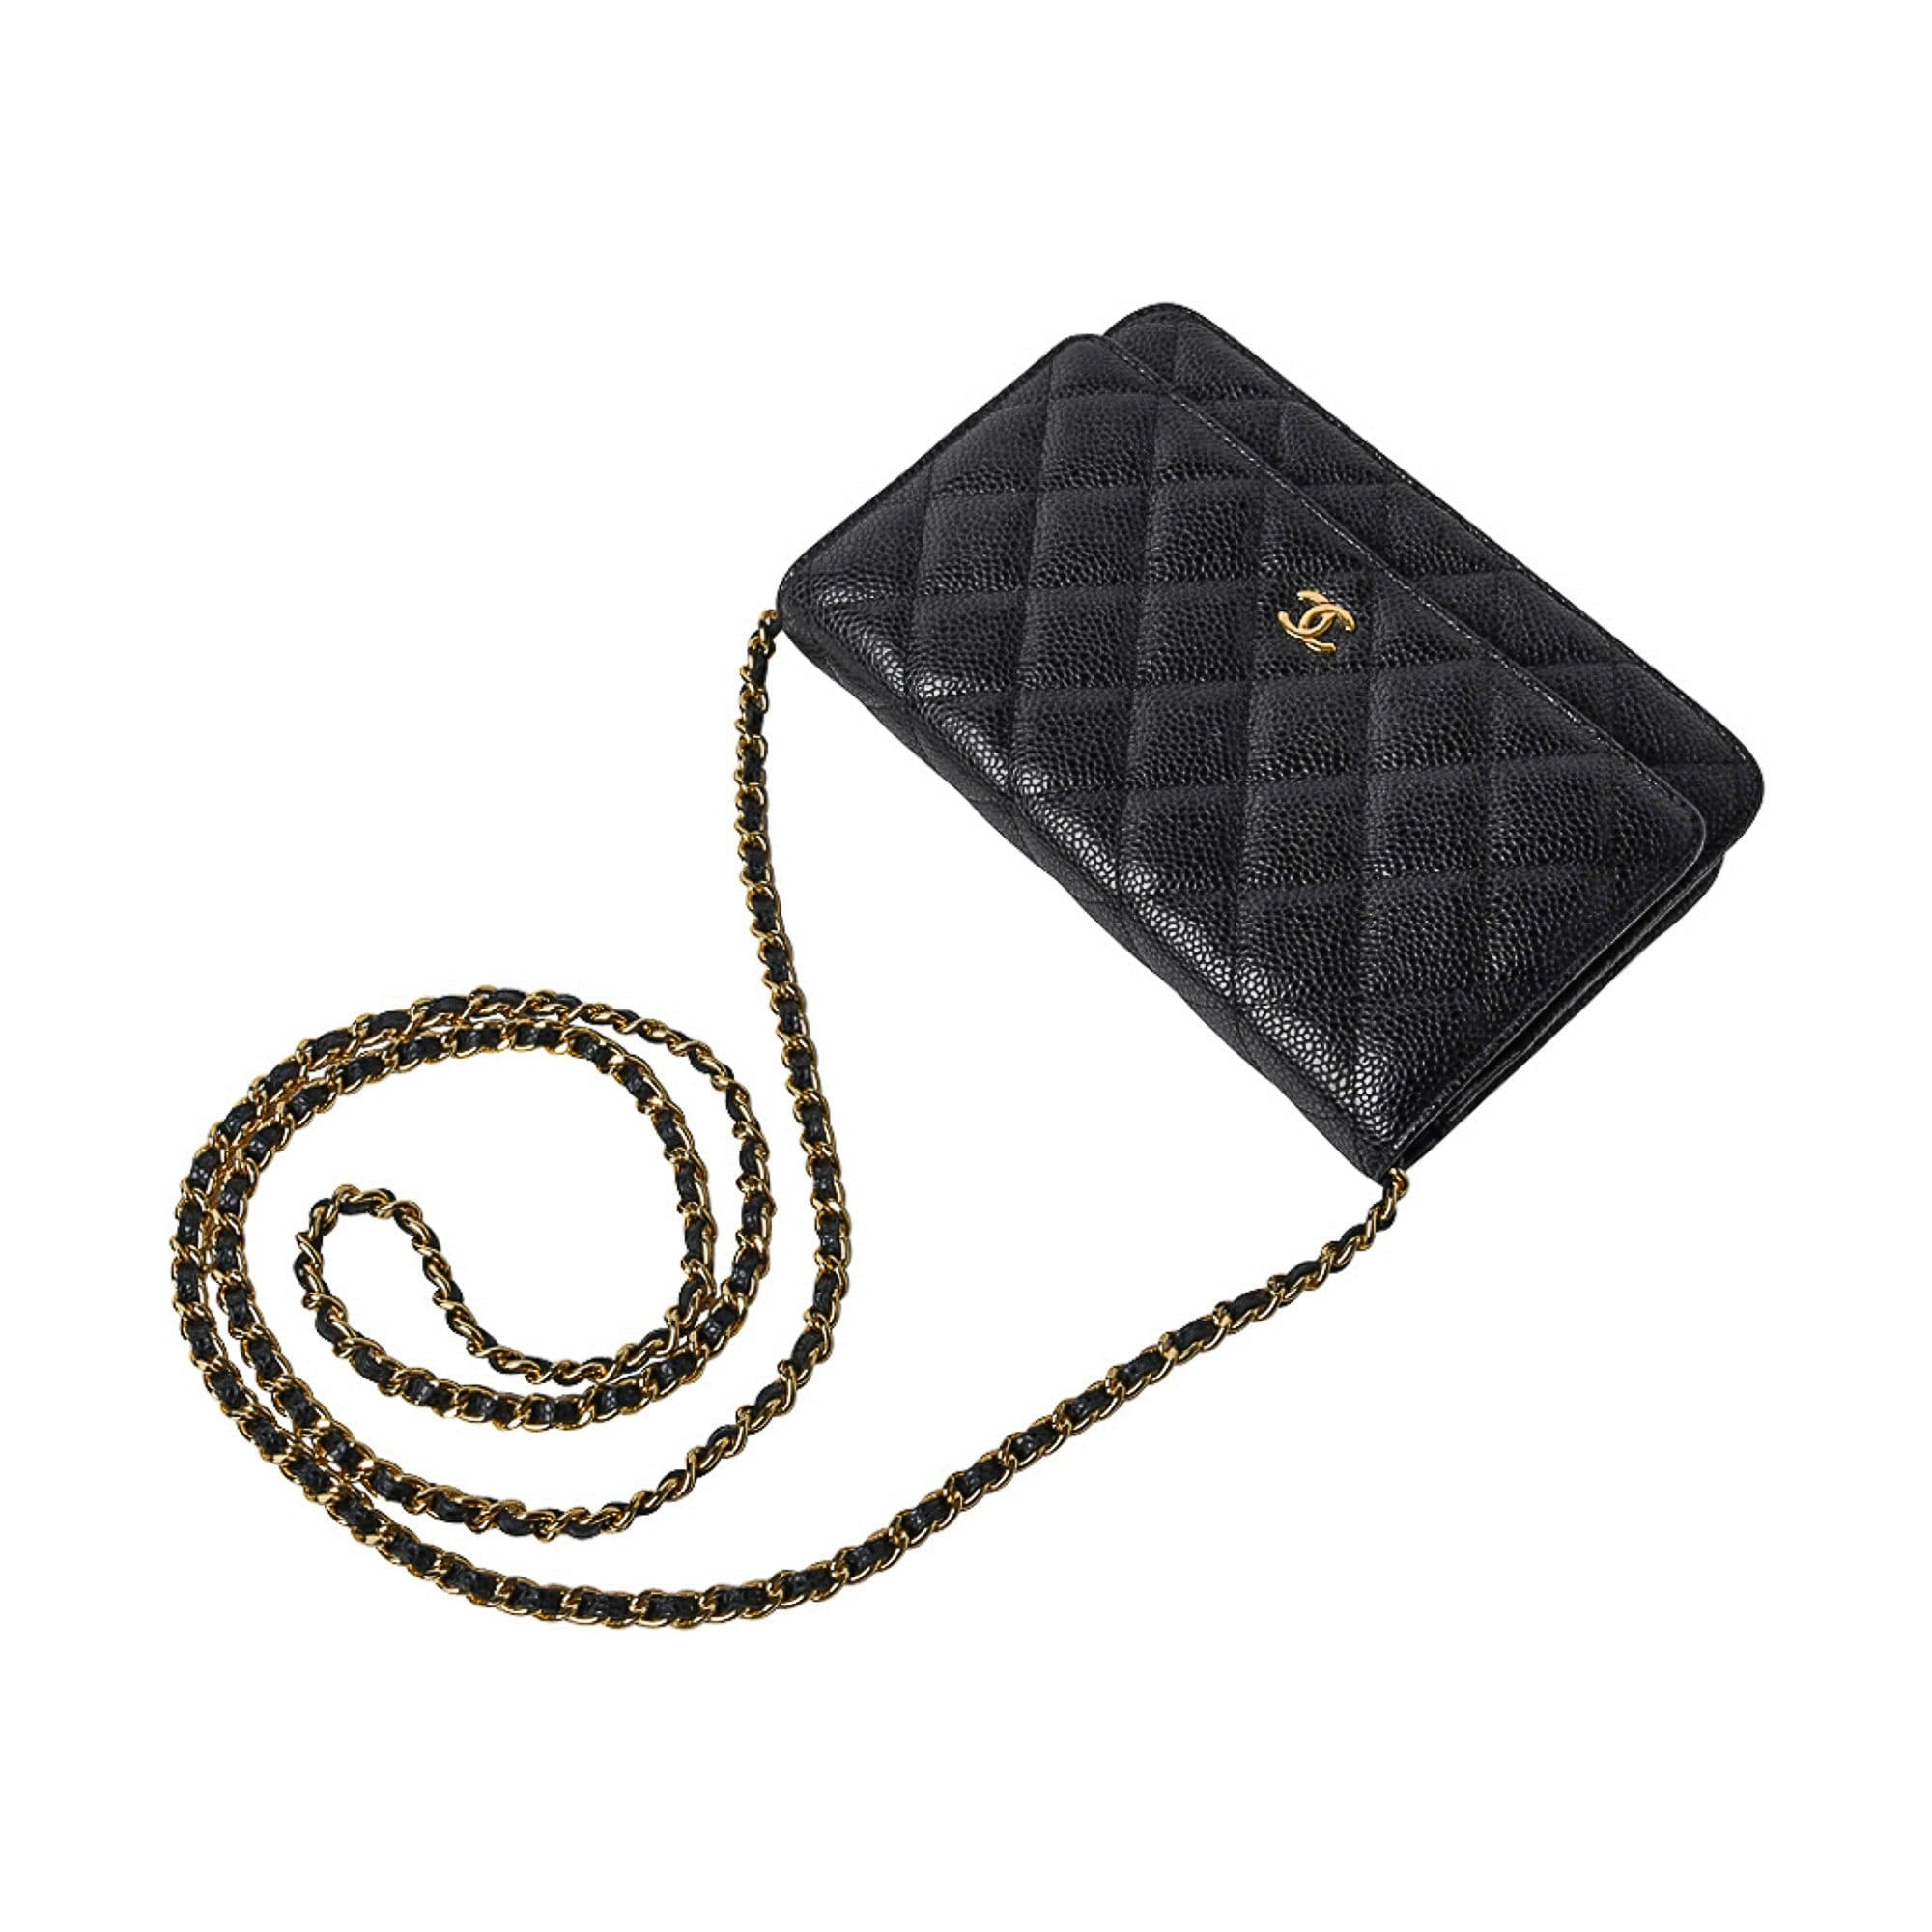 Chanel Wallet on Chain WOC Caviar Black Quilted Leather Bag w/Box